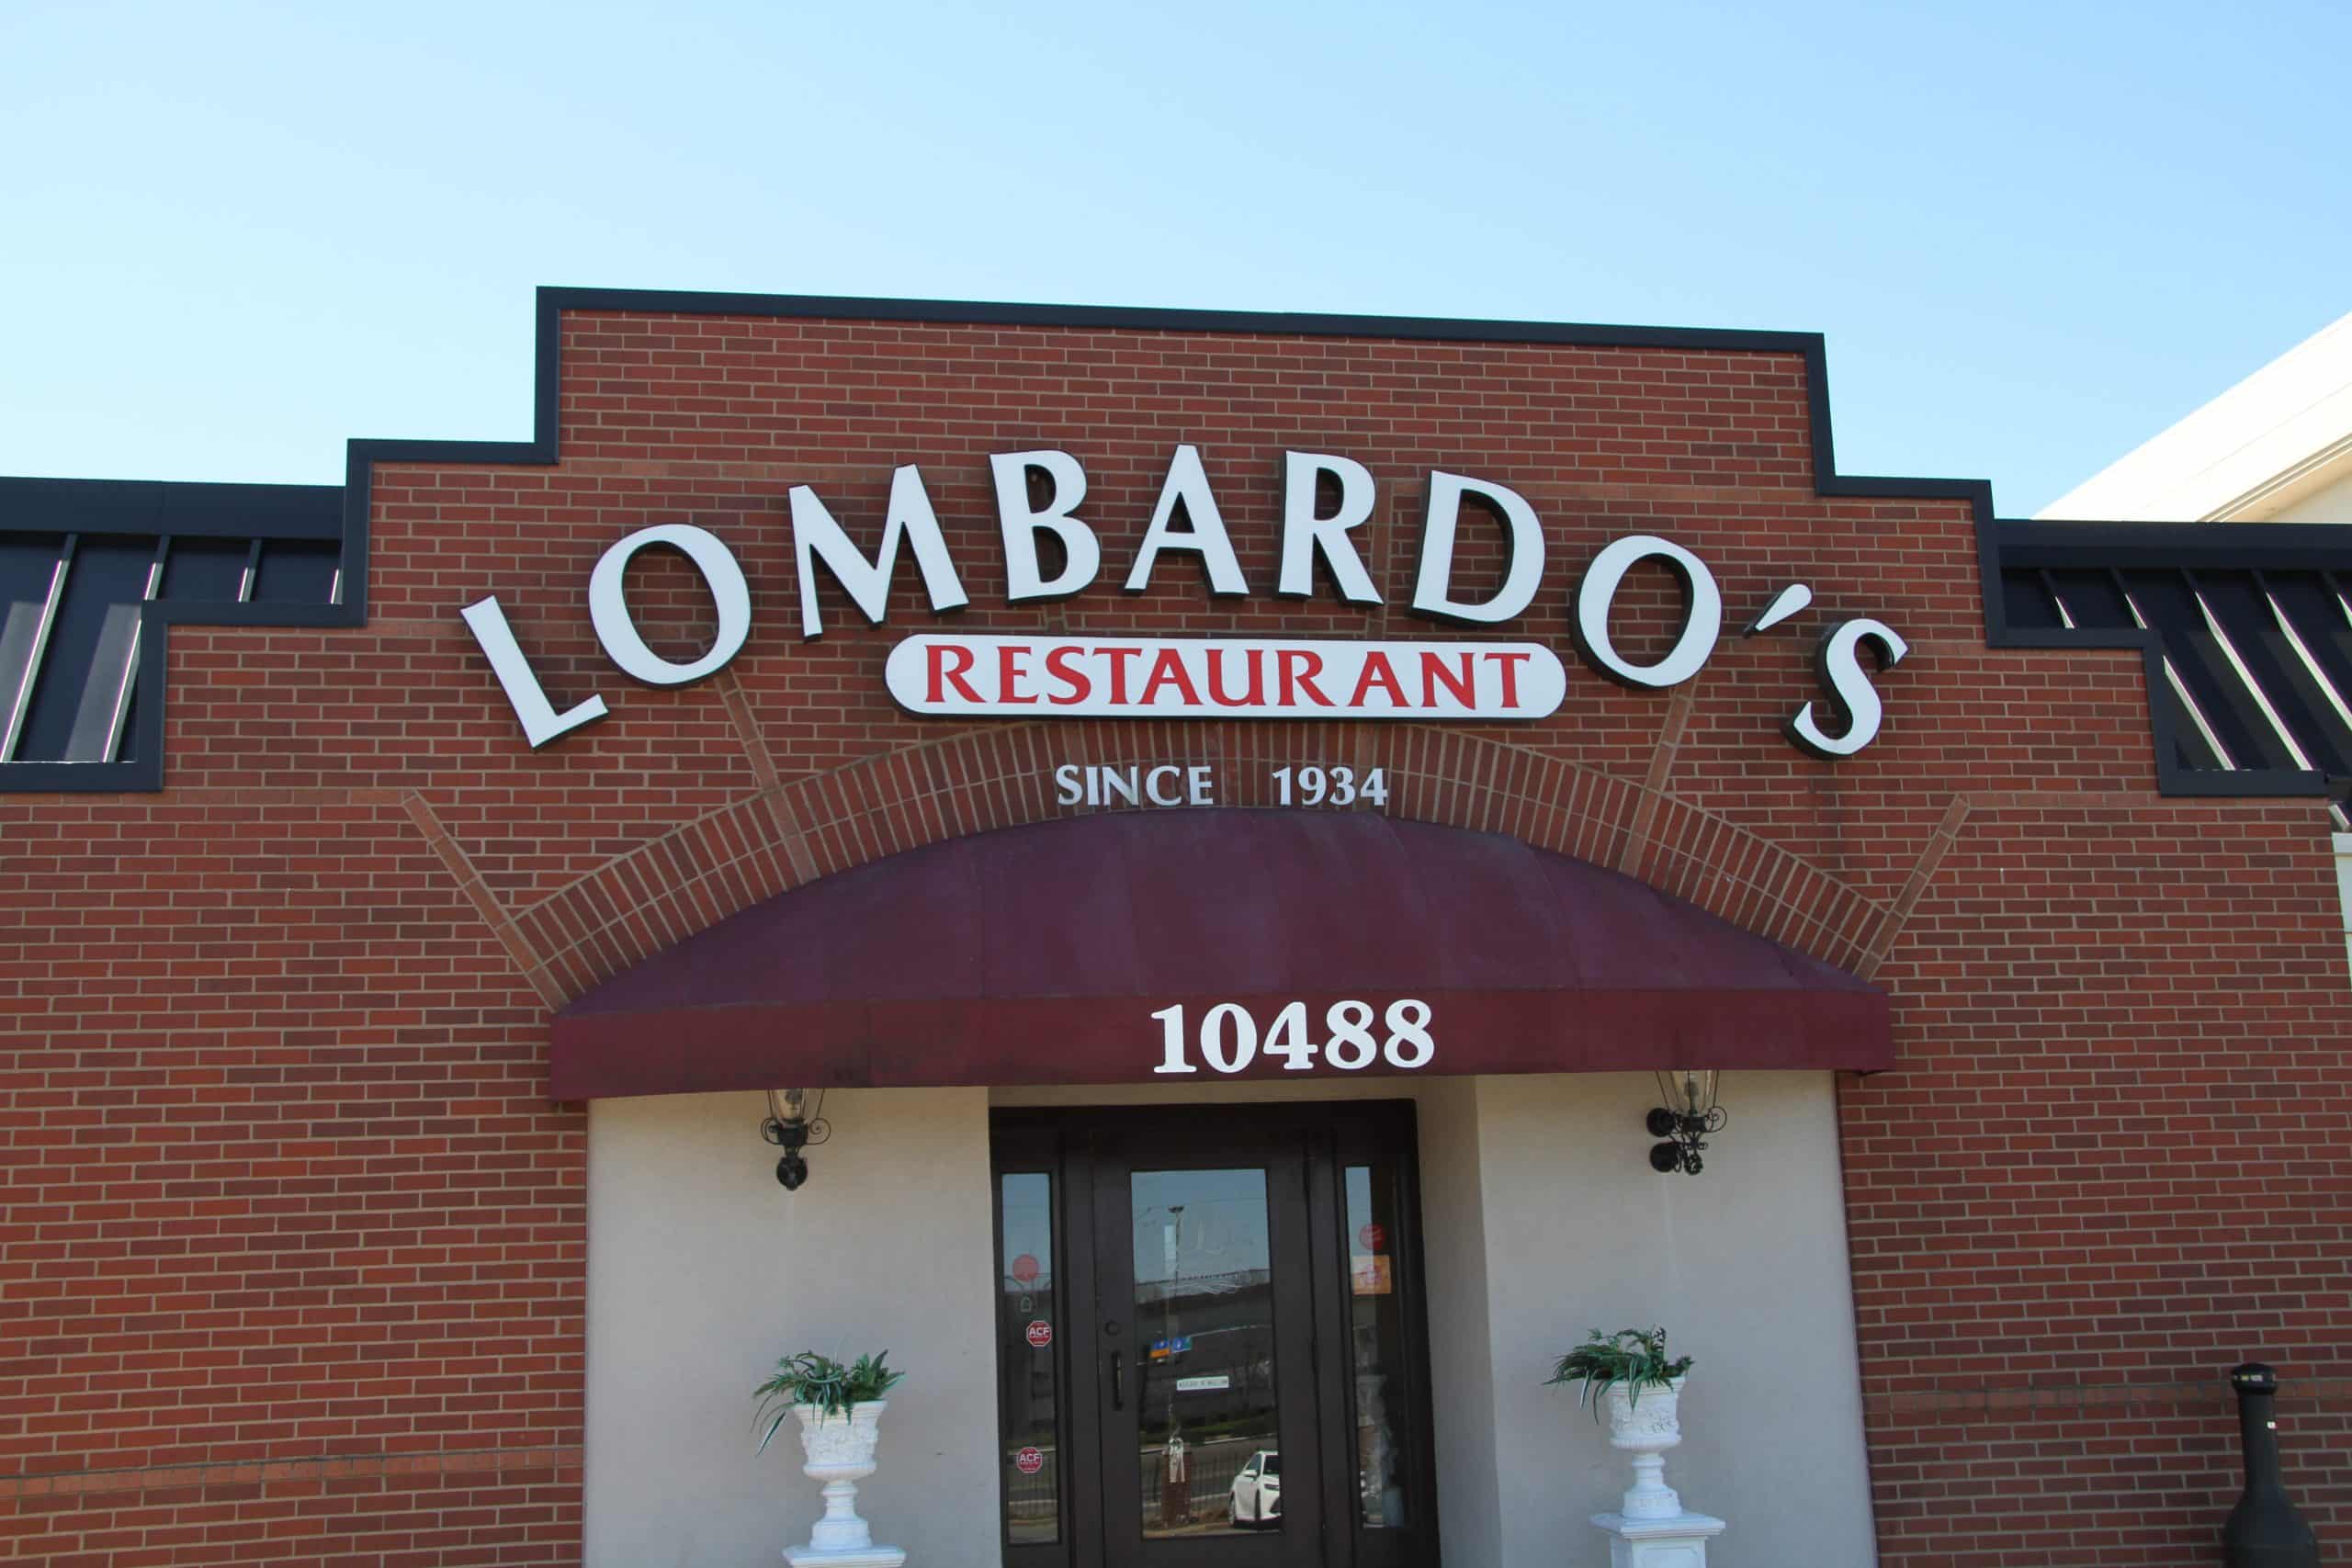 Lombardo’s Restaurant Added to St. Louis Restaurant Directory